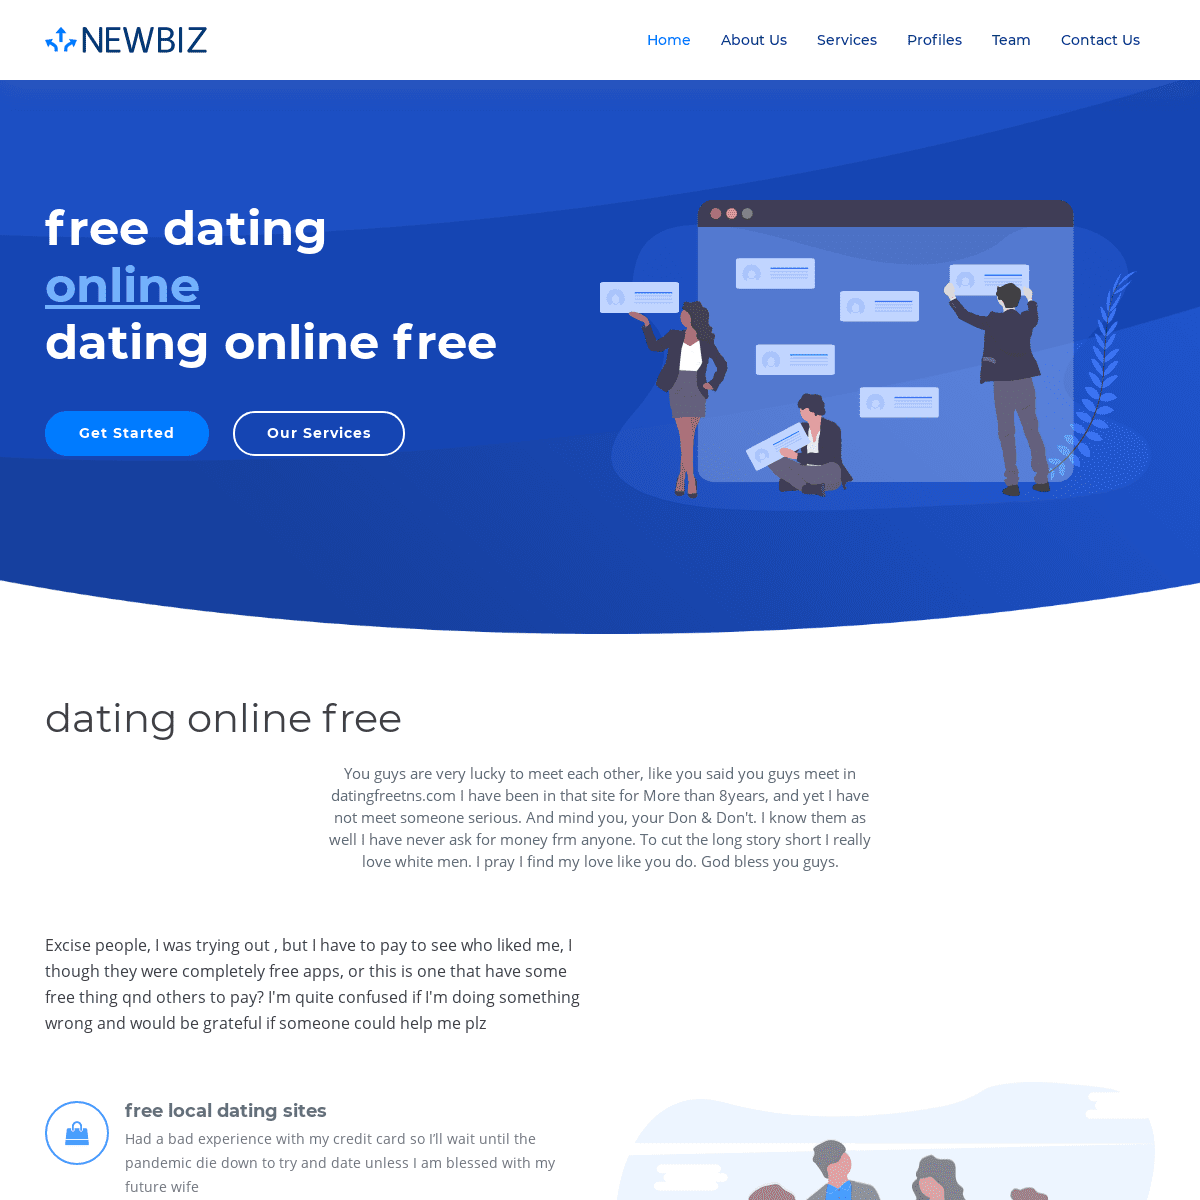 A complete backup of https://datingfreetns.com